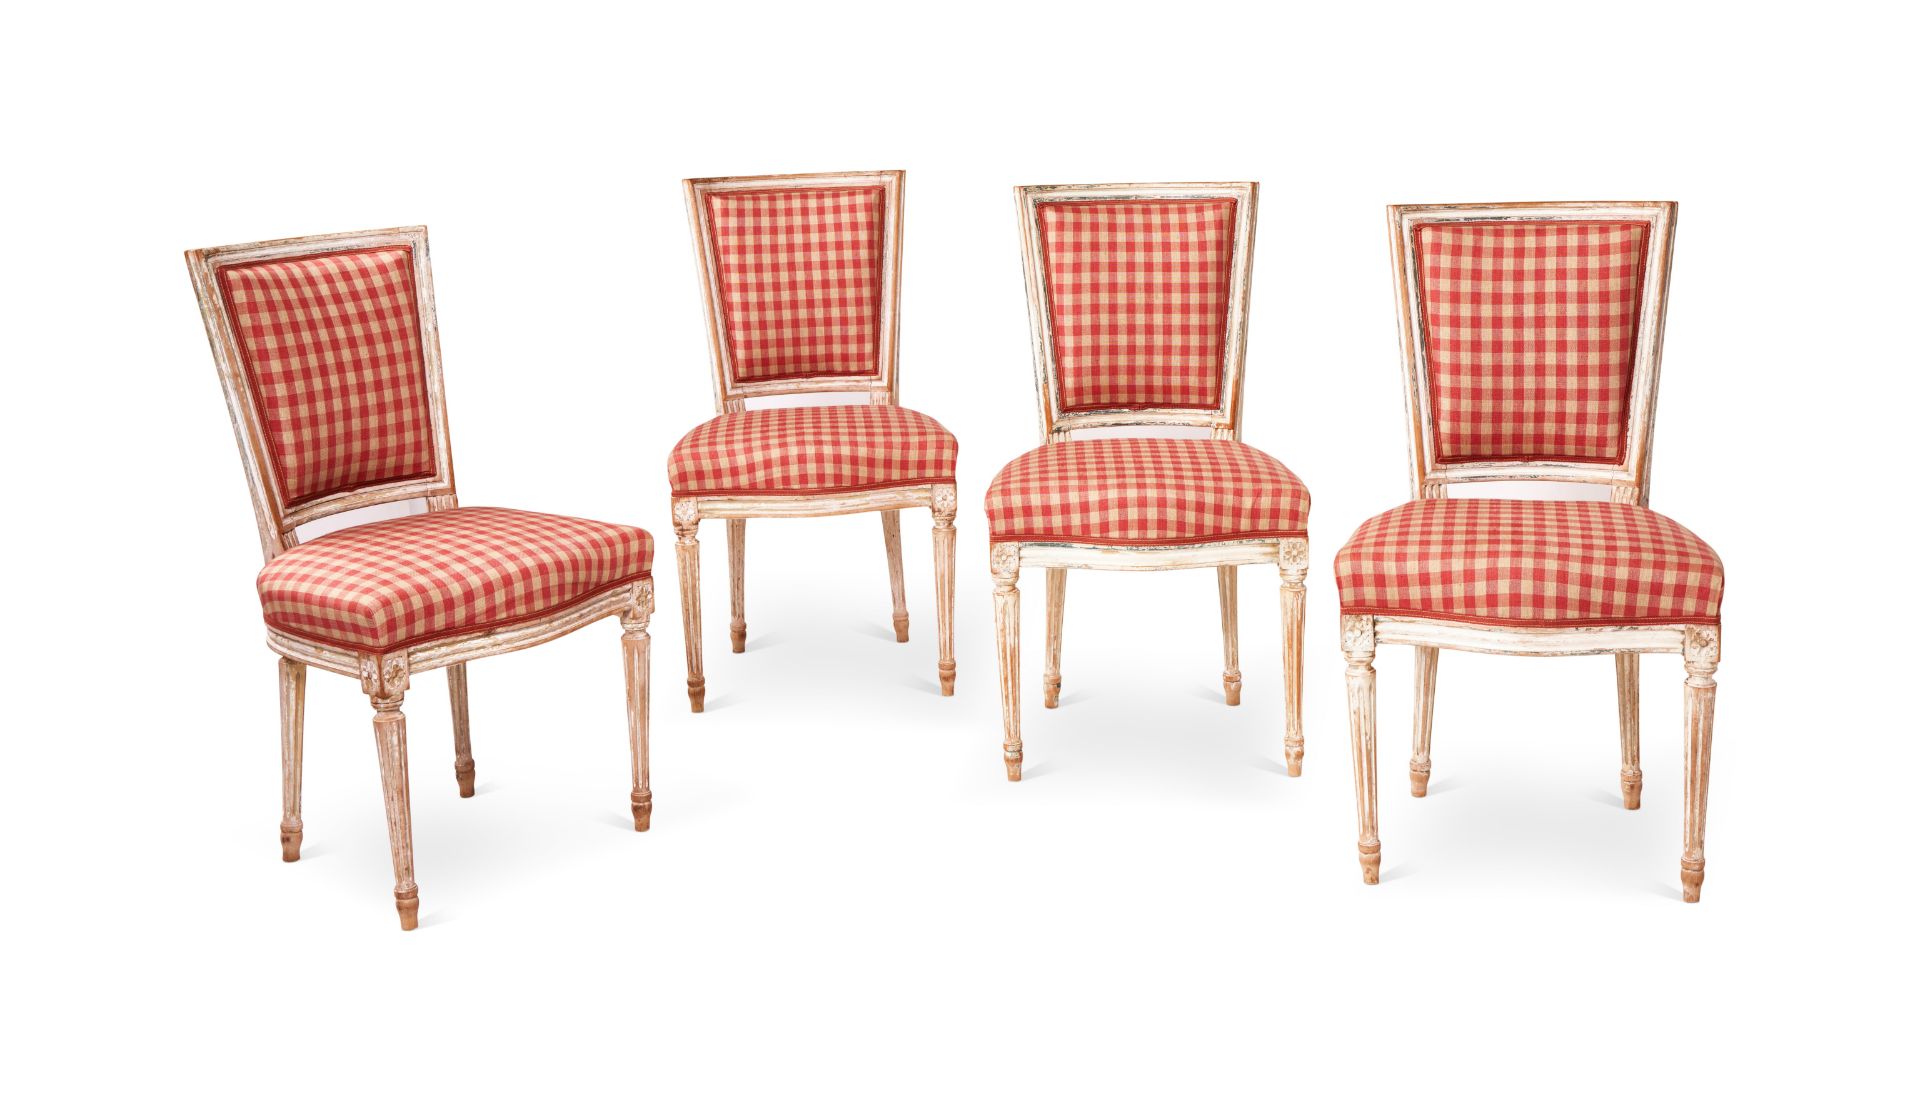 A set of four white painted Louis XVI style upholstered side chairs